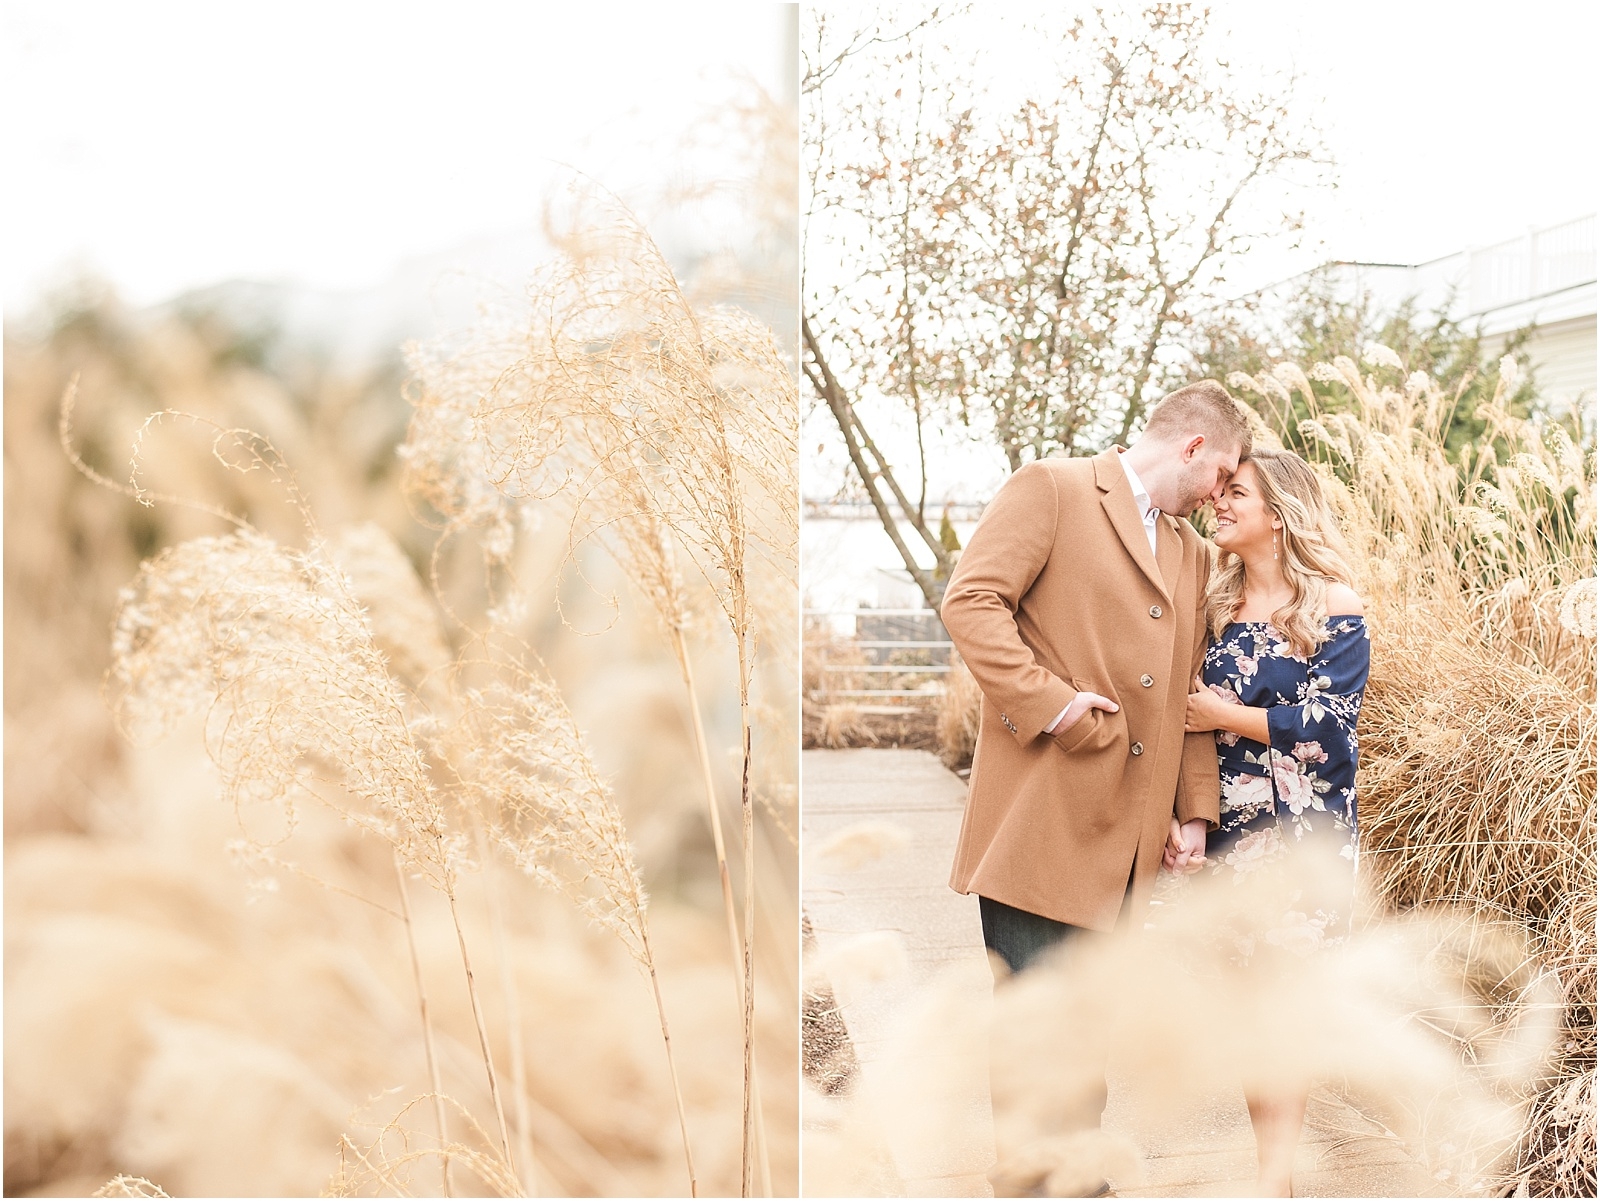 Kayla and Colten | Engaged-16.jpg